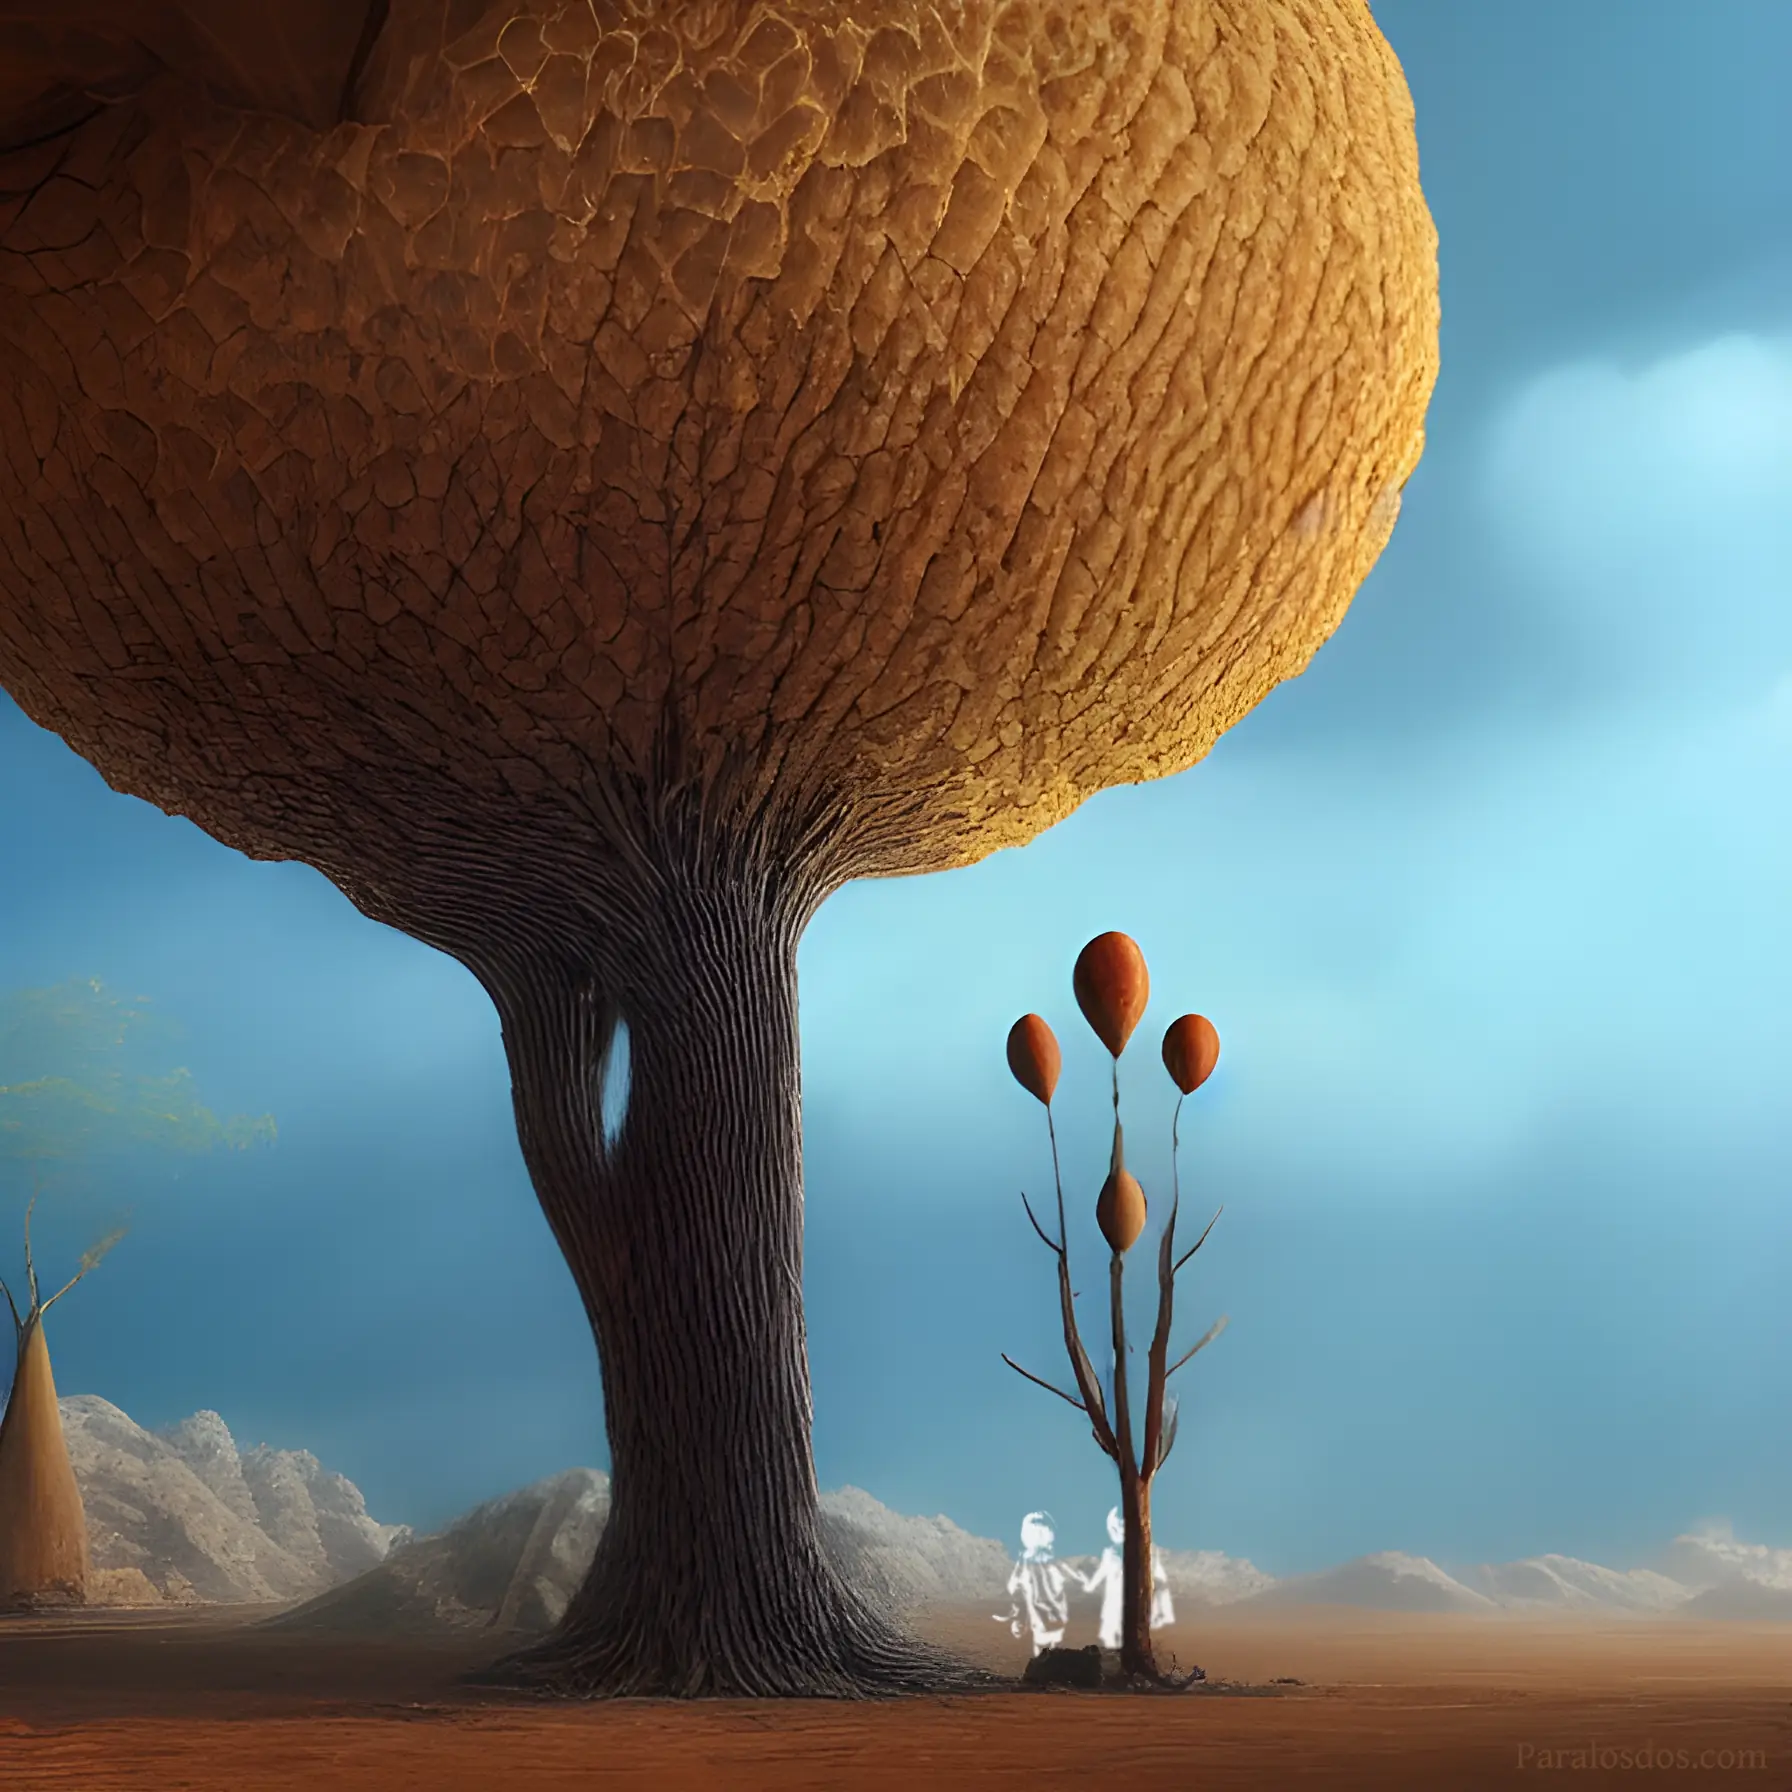 A fantastical artistic rendering of a weird big tree with an odd smaller tree to the right and in front of it.